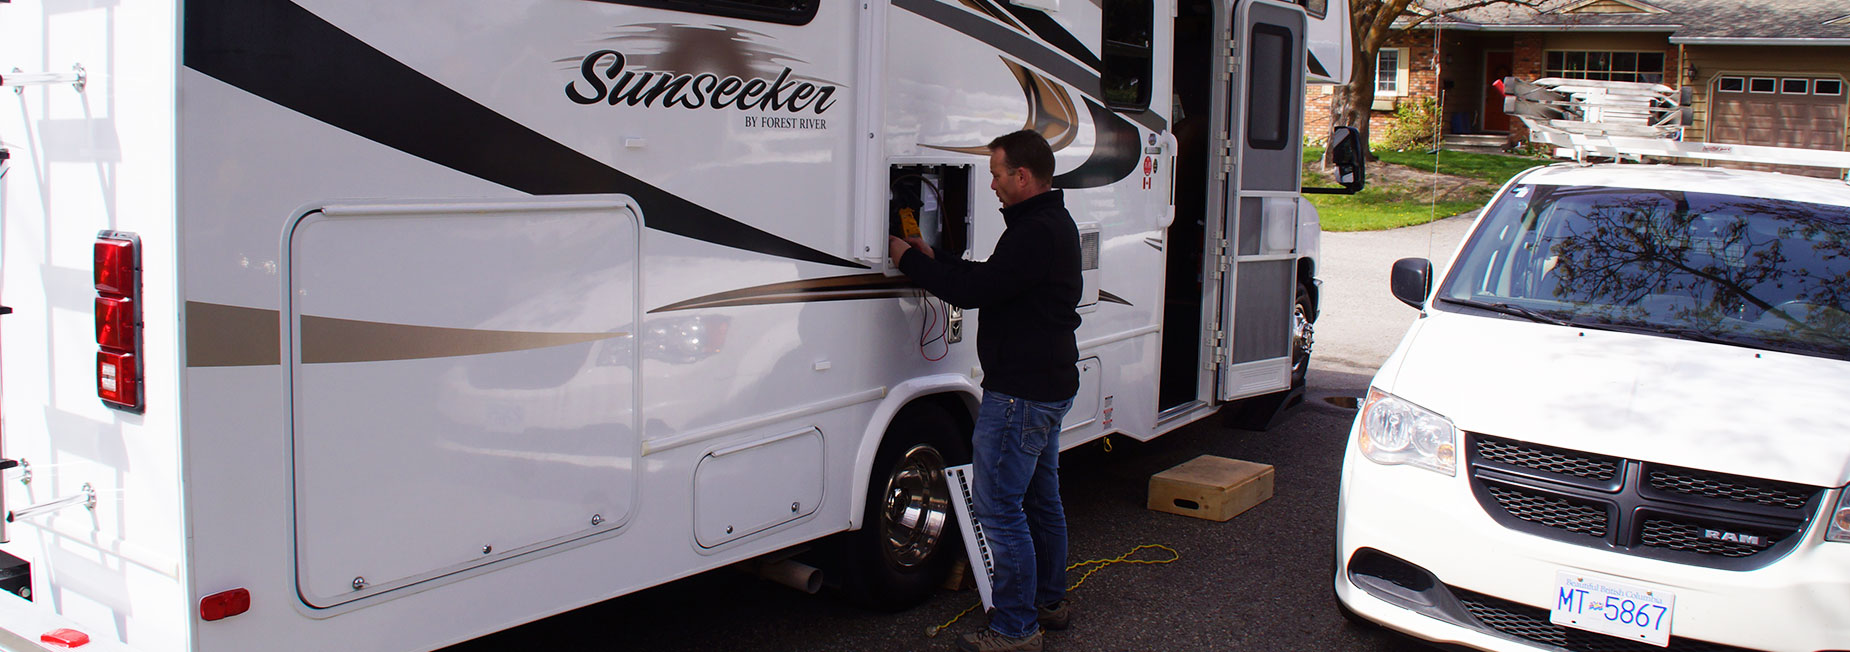 Let Keystone RV Services ensure that your plumbing system is working properly in order to avoid any surprises when you're in the middle of nowhere!